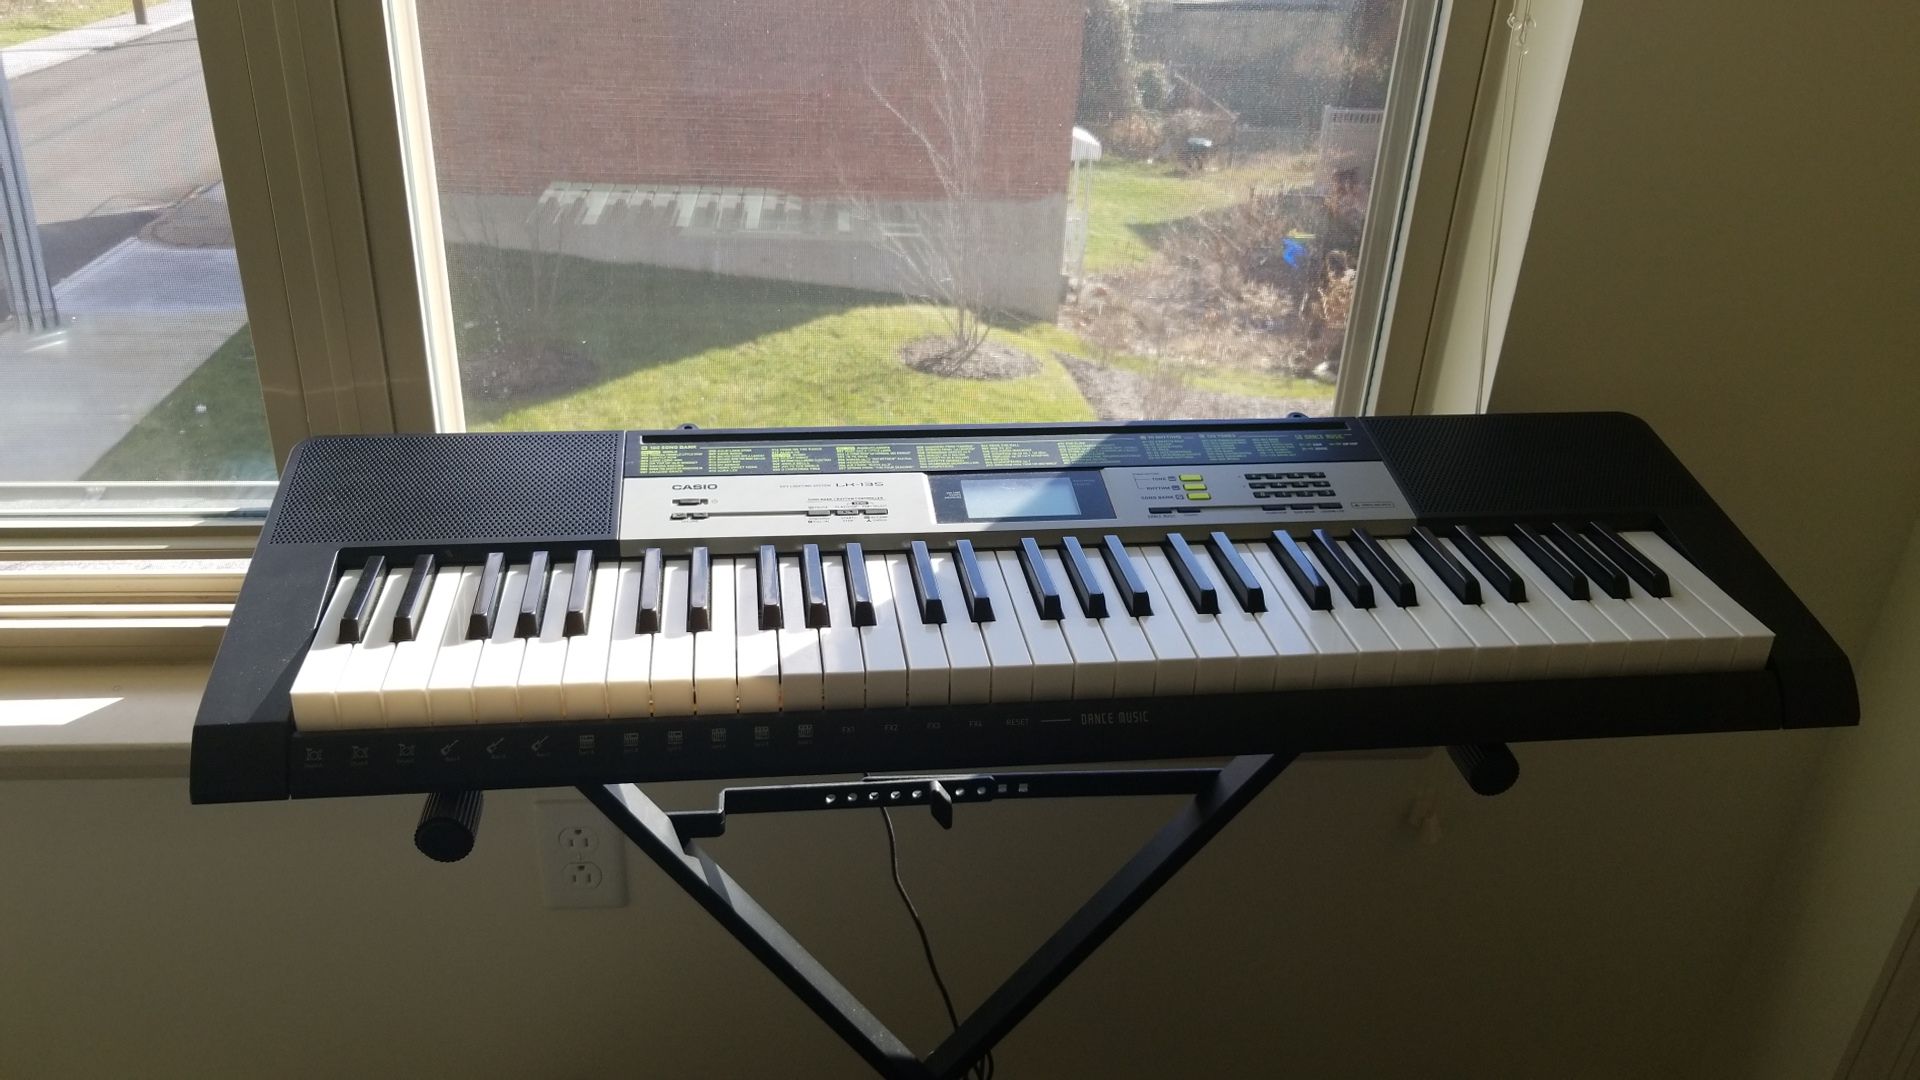 Casio keyboard and it's stand for $50